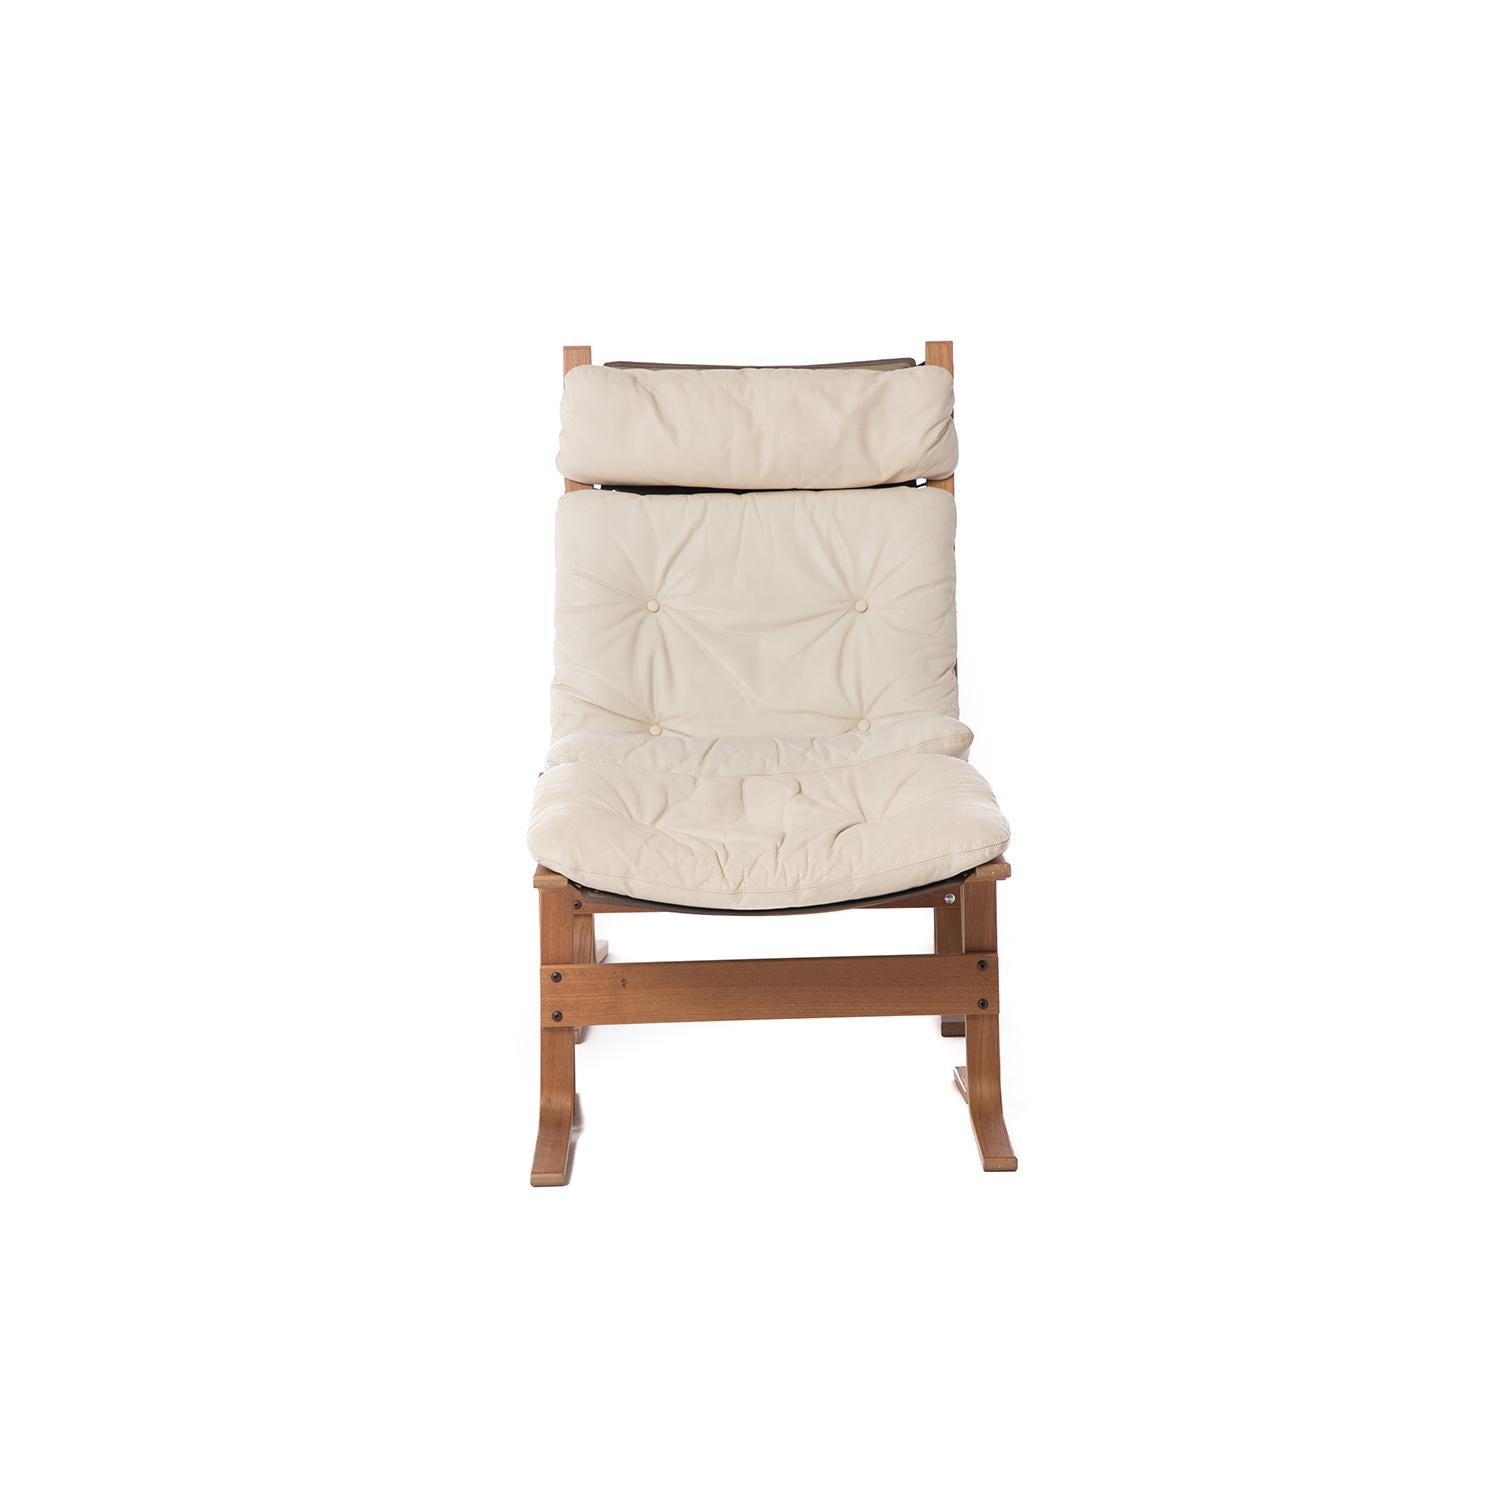 This Classic 1970s Scandinavian modern design from Norway is as comfortable as it is good looking. This lounge and ottoman are made of teak with a natural hemp sling with black grommets and lacing. The off-white leather cushions are original- supple